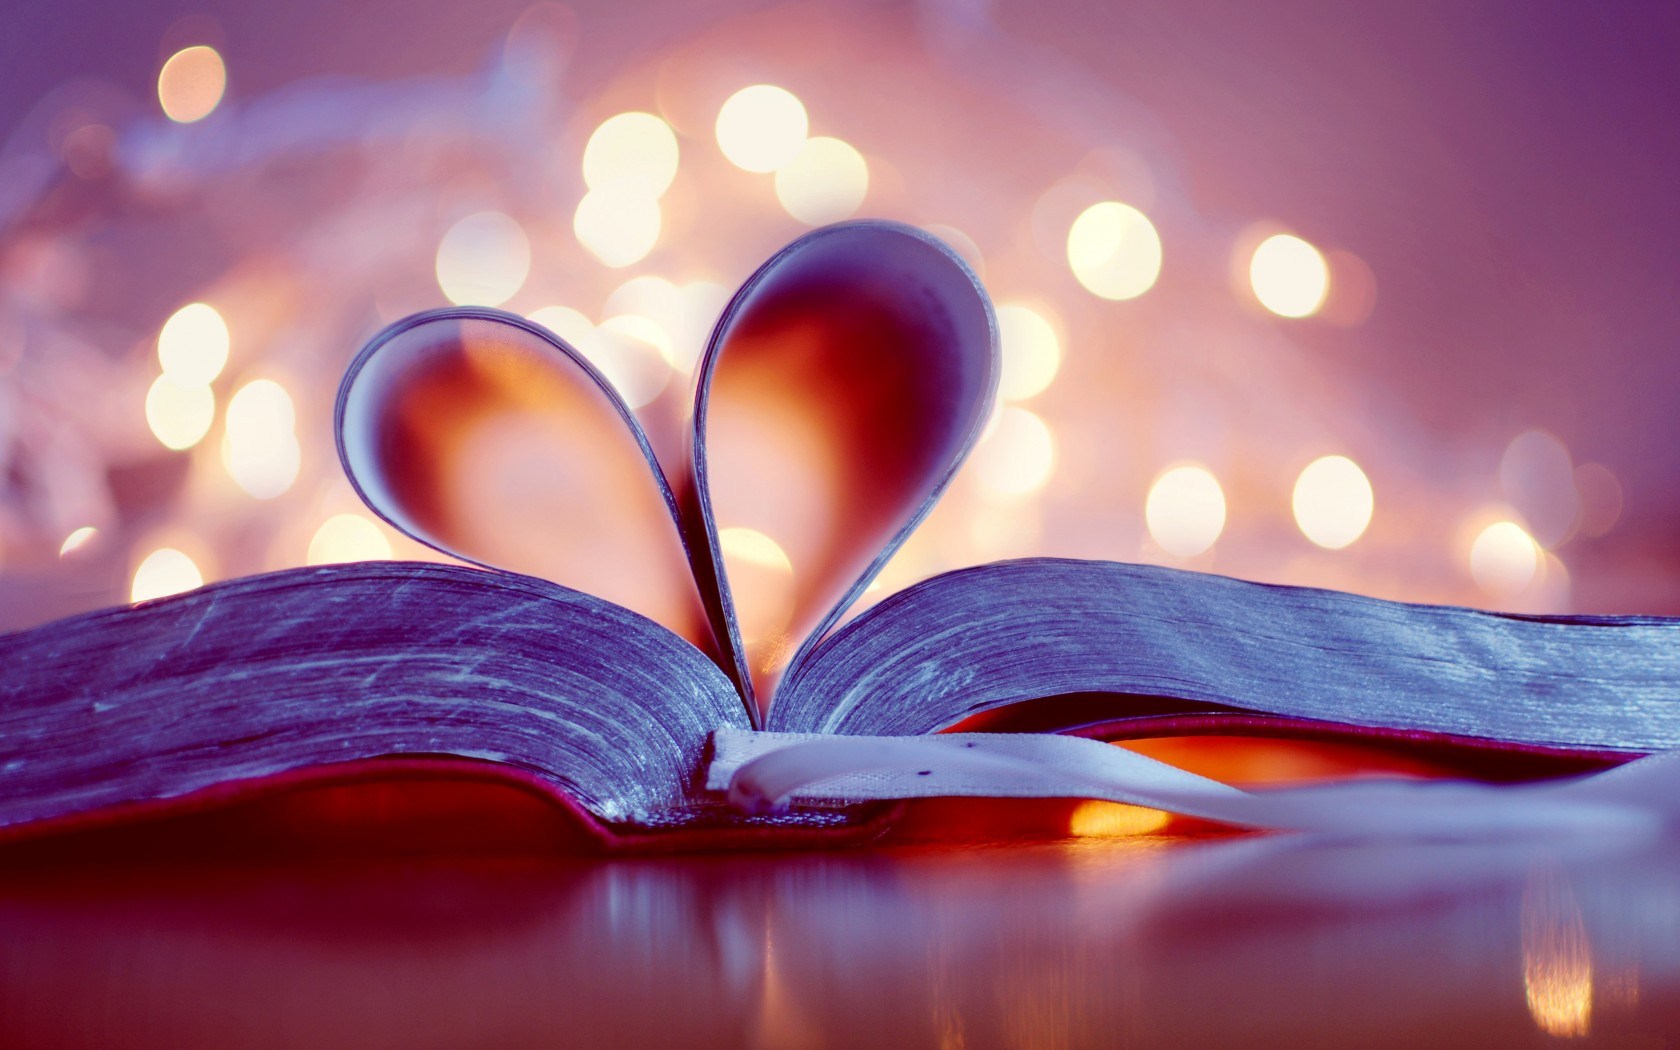 A book open with pages in the middle curved in to form a heart.